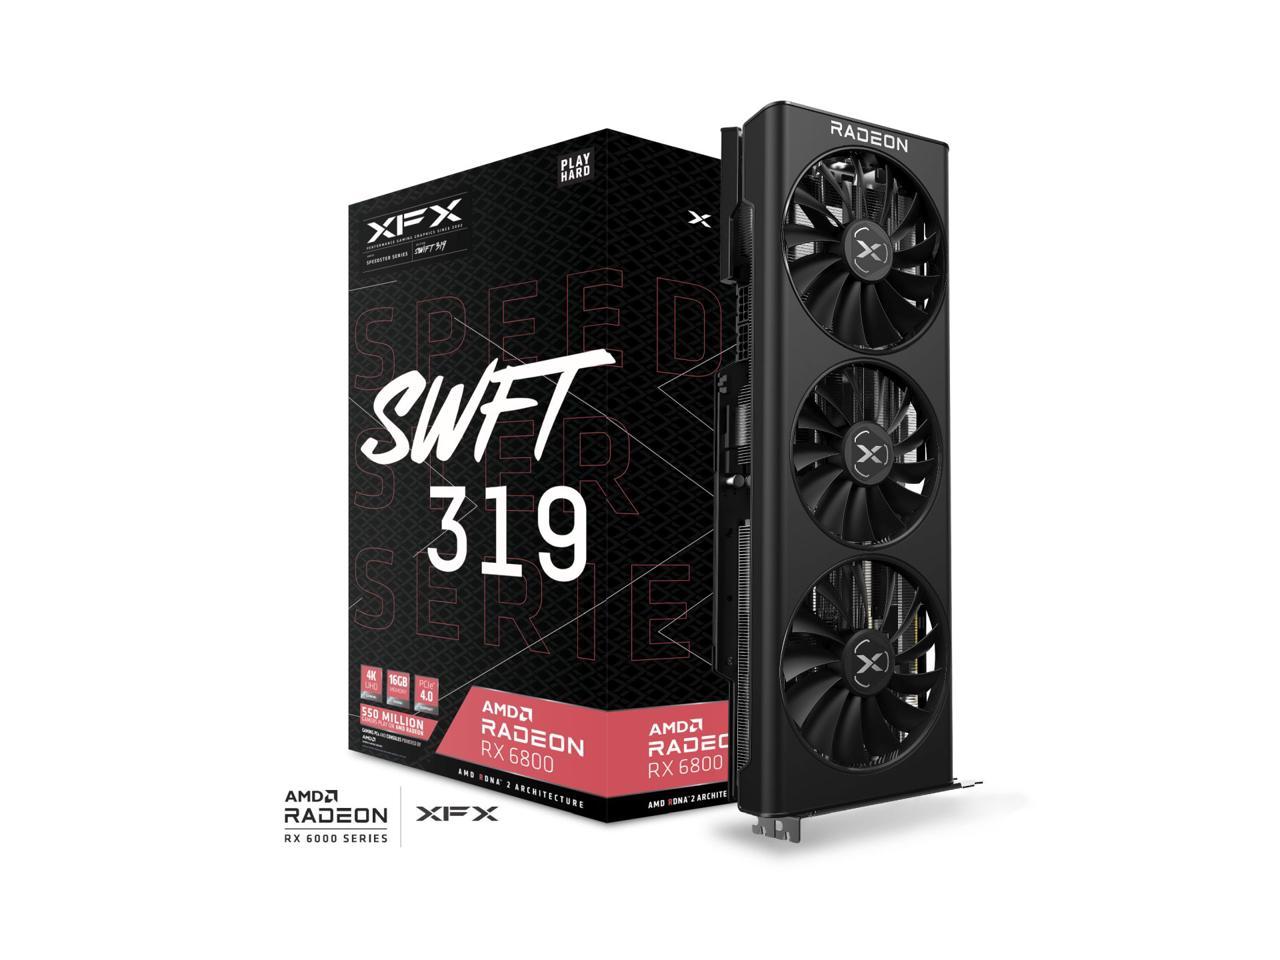 XFX Speedster SWFT319 AMD Radeon RX 6800 Core 16GB GDDR6 Gaming Graphics Card $380 + Free Shipping